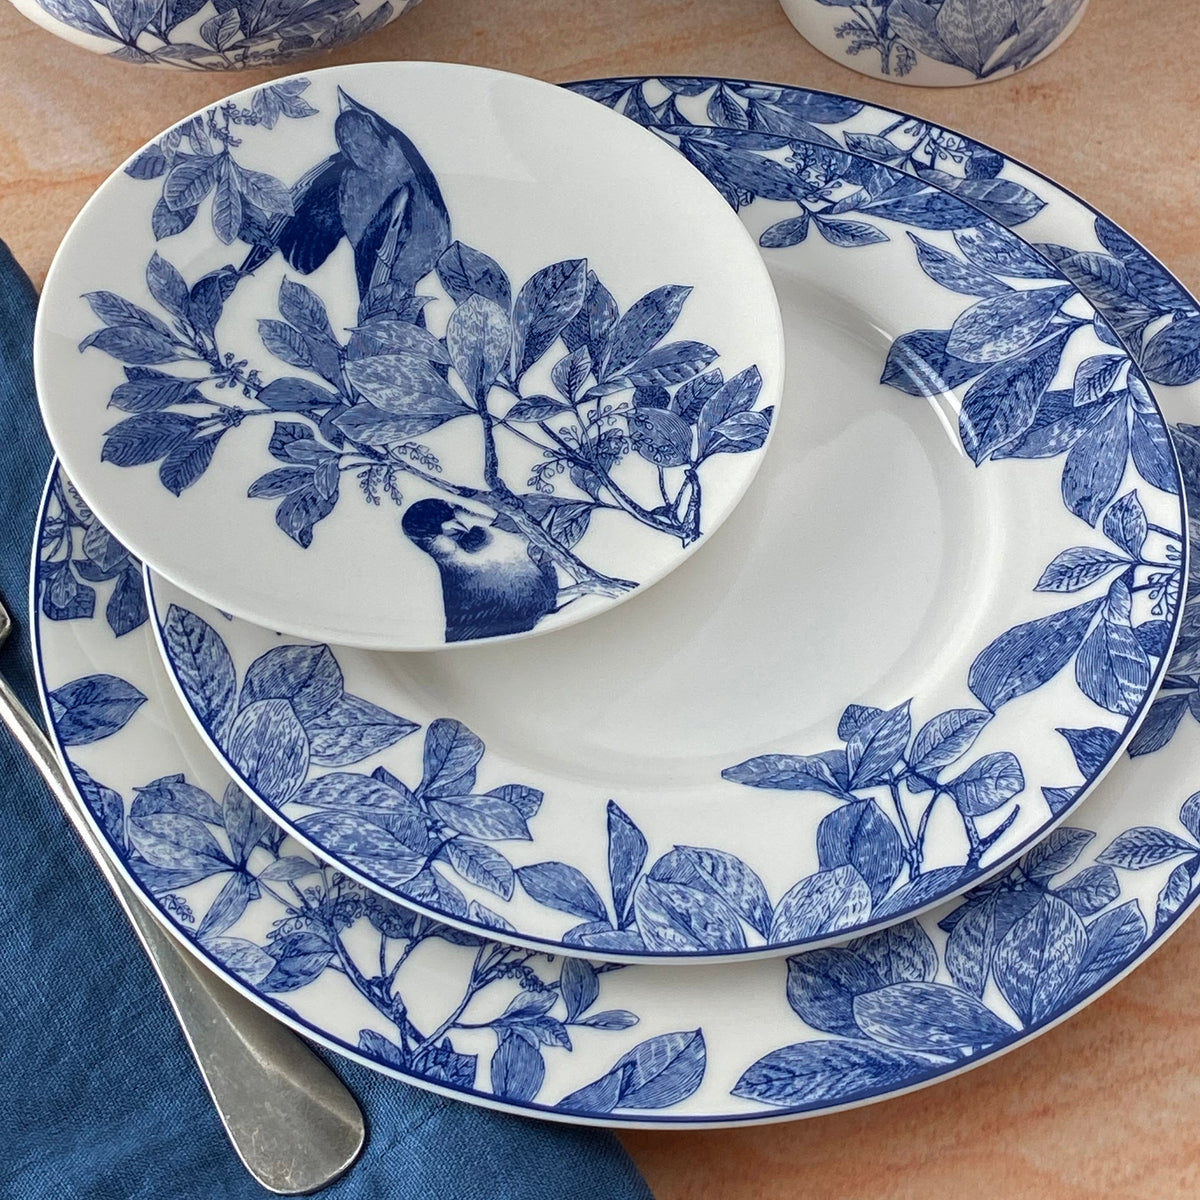 Blue and White porcelain Arbor Dinnerware from Caskata includes the Arbor birds canape plate, salad plate and dinner plate.